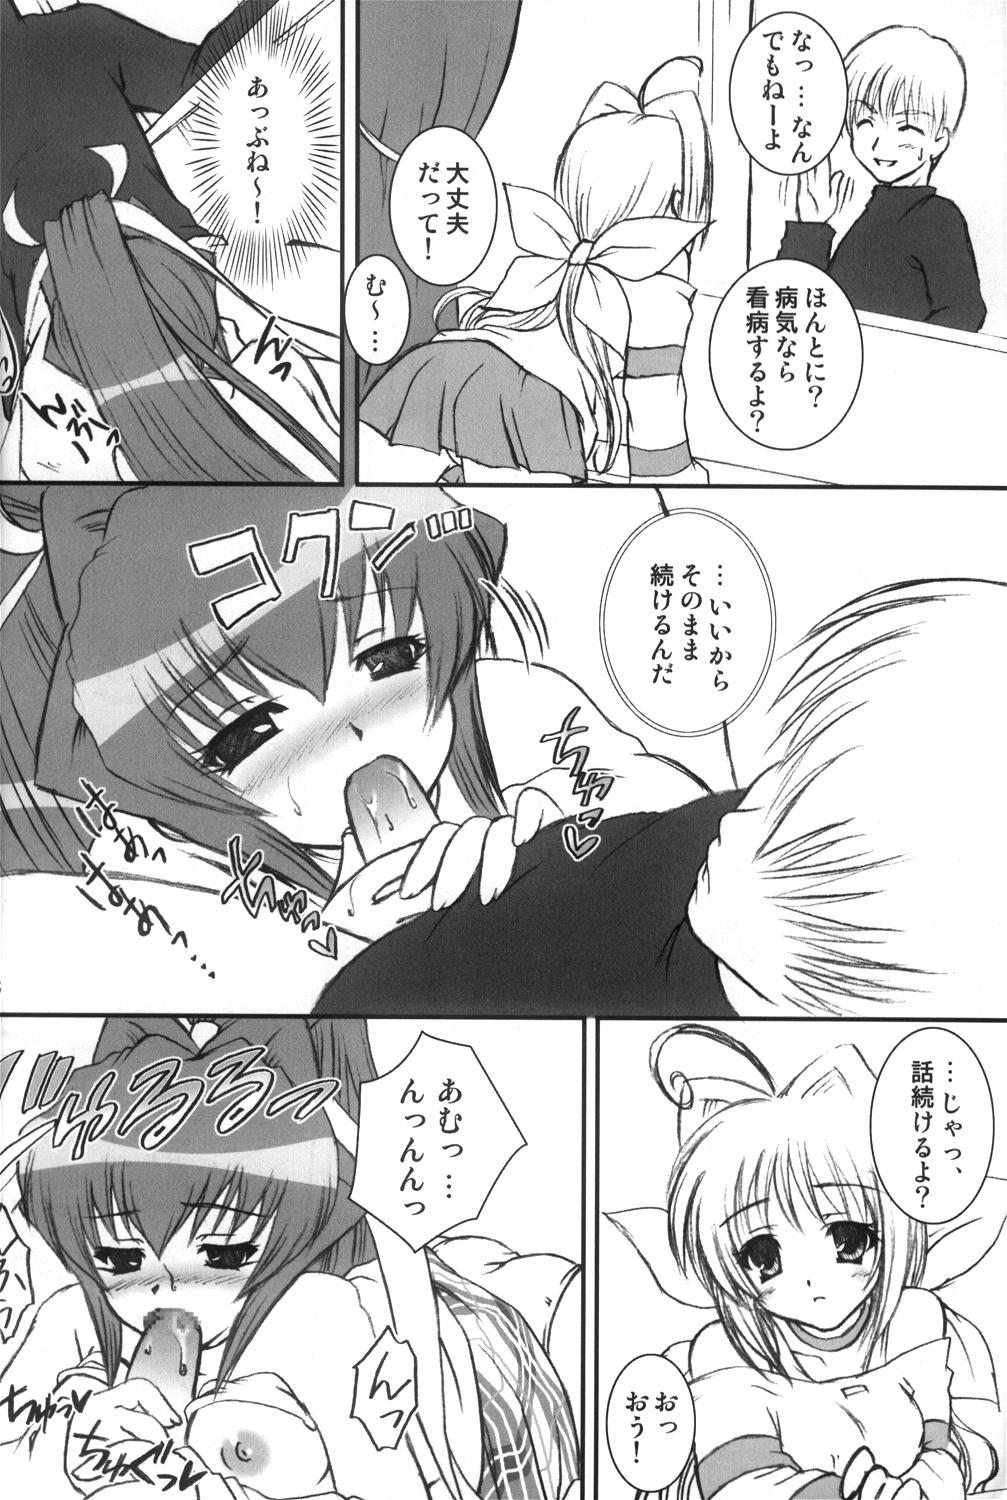 Tits I have fallen in love with you... - Muv-luv Gay Massage - Page 7